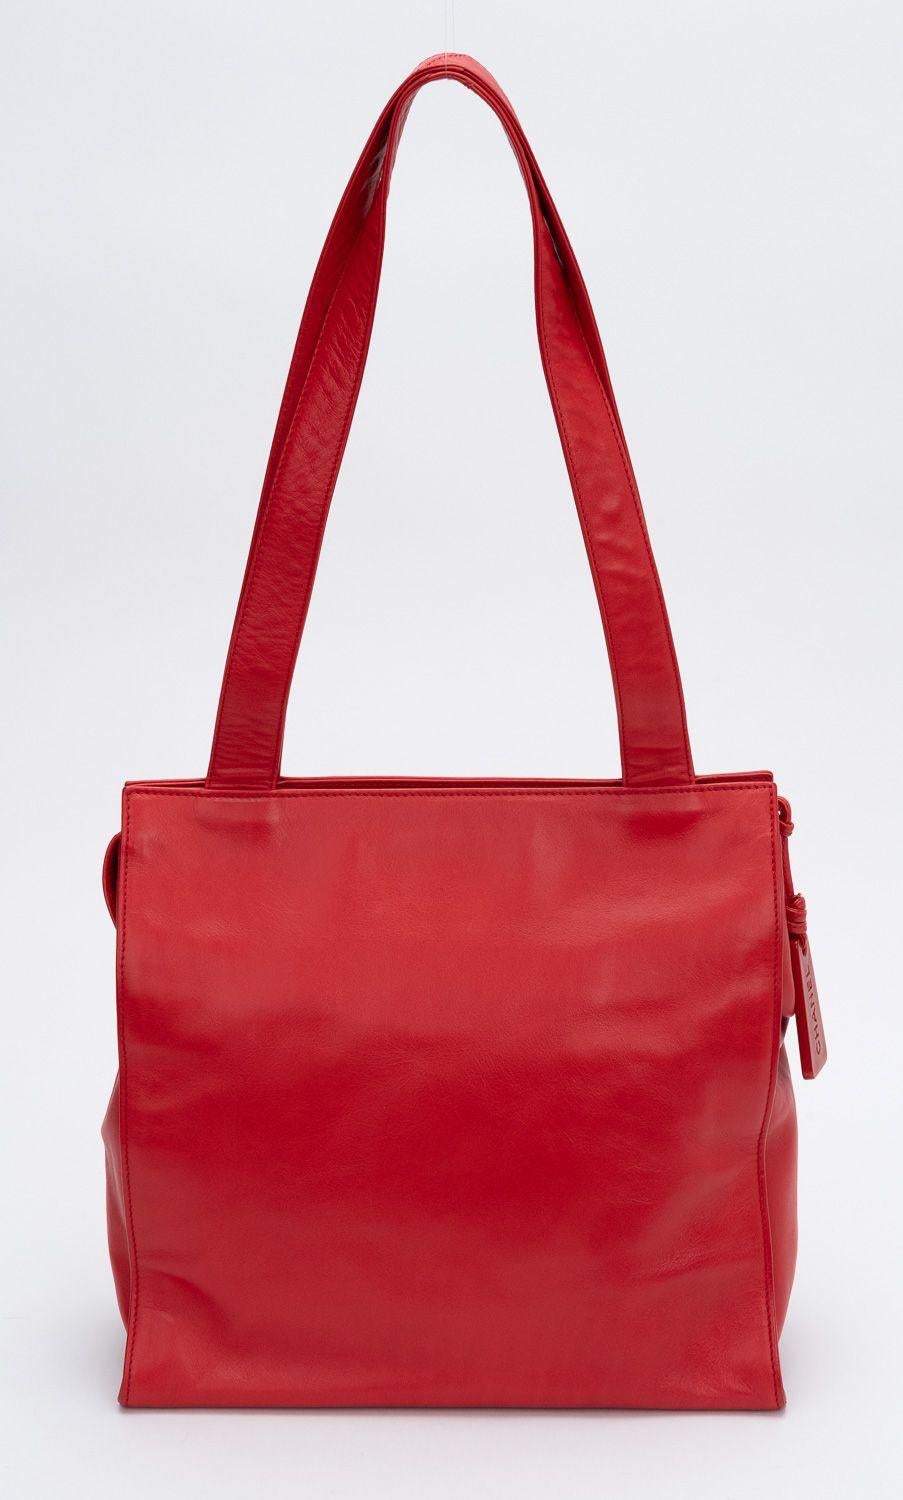 Women's or Men's Chanel Vintage Lambskin Tote Bag Red For Sale